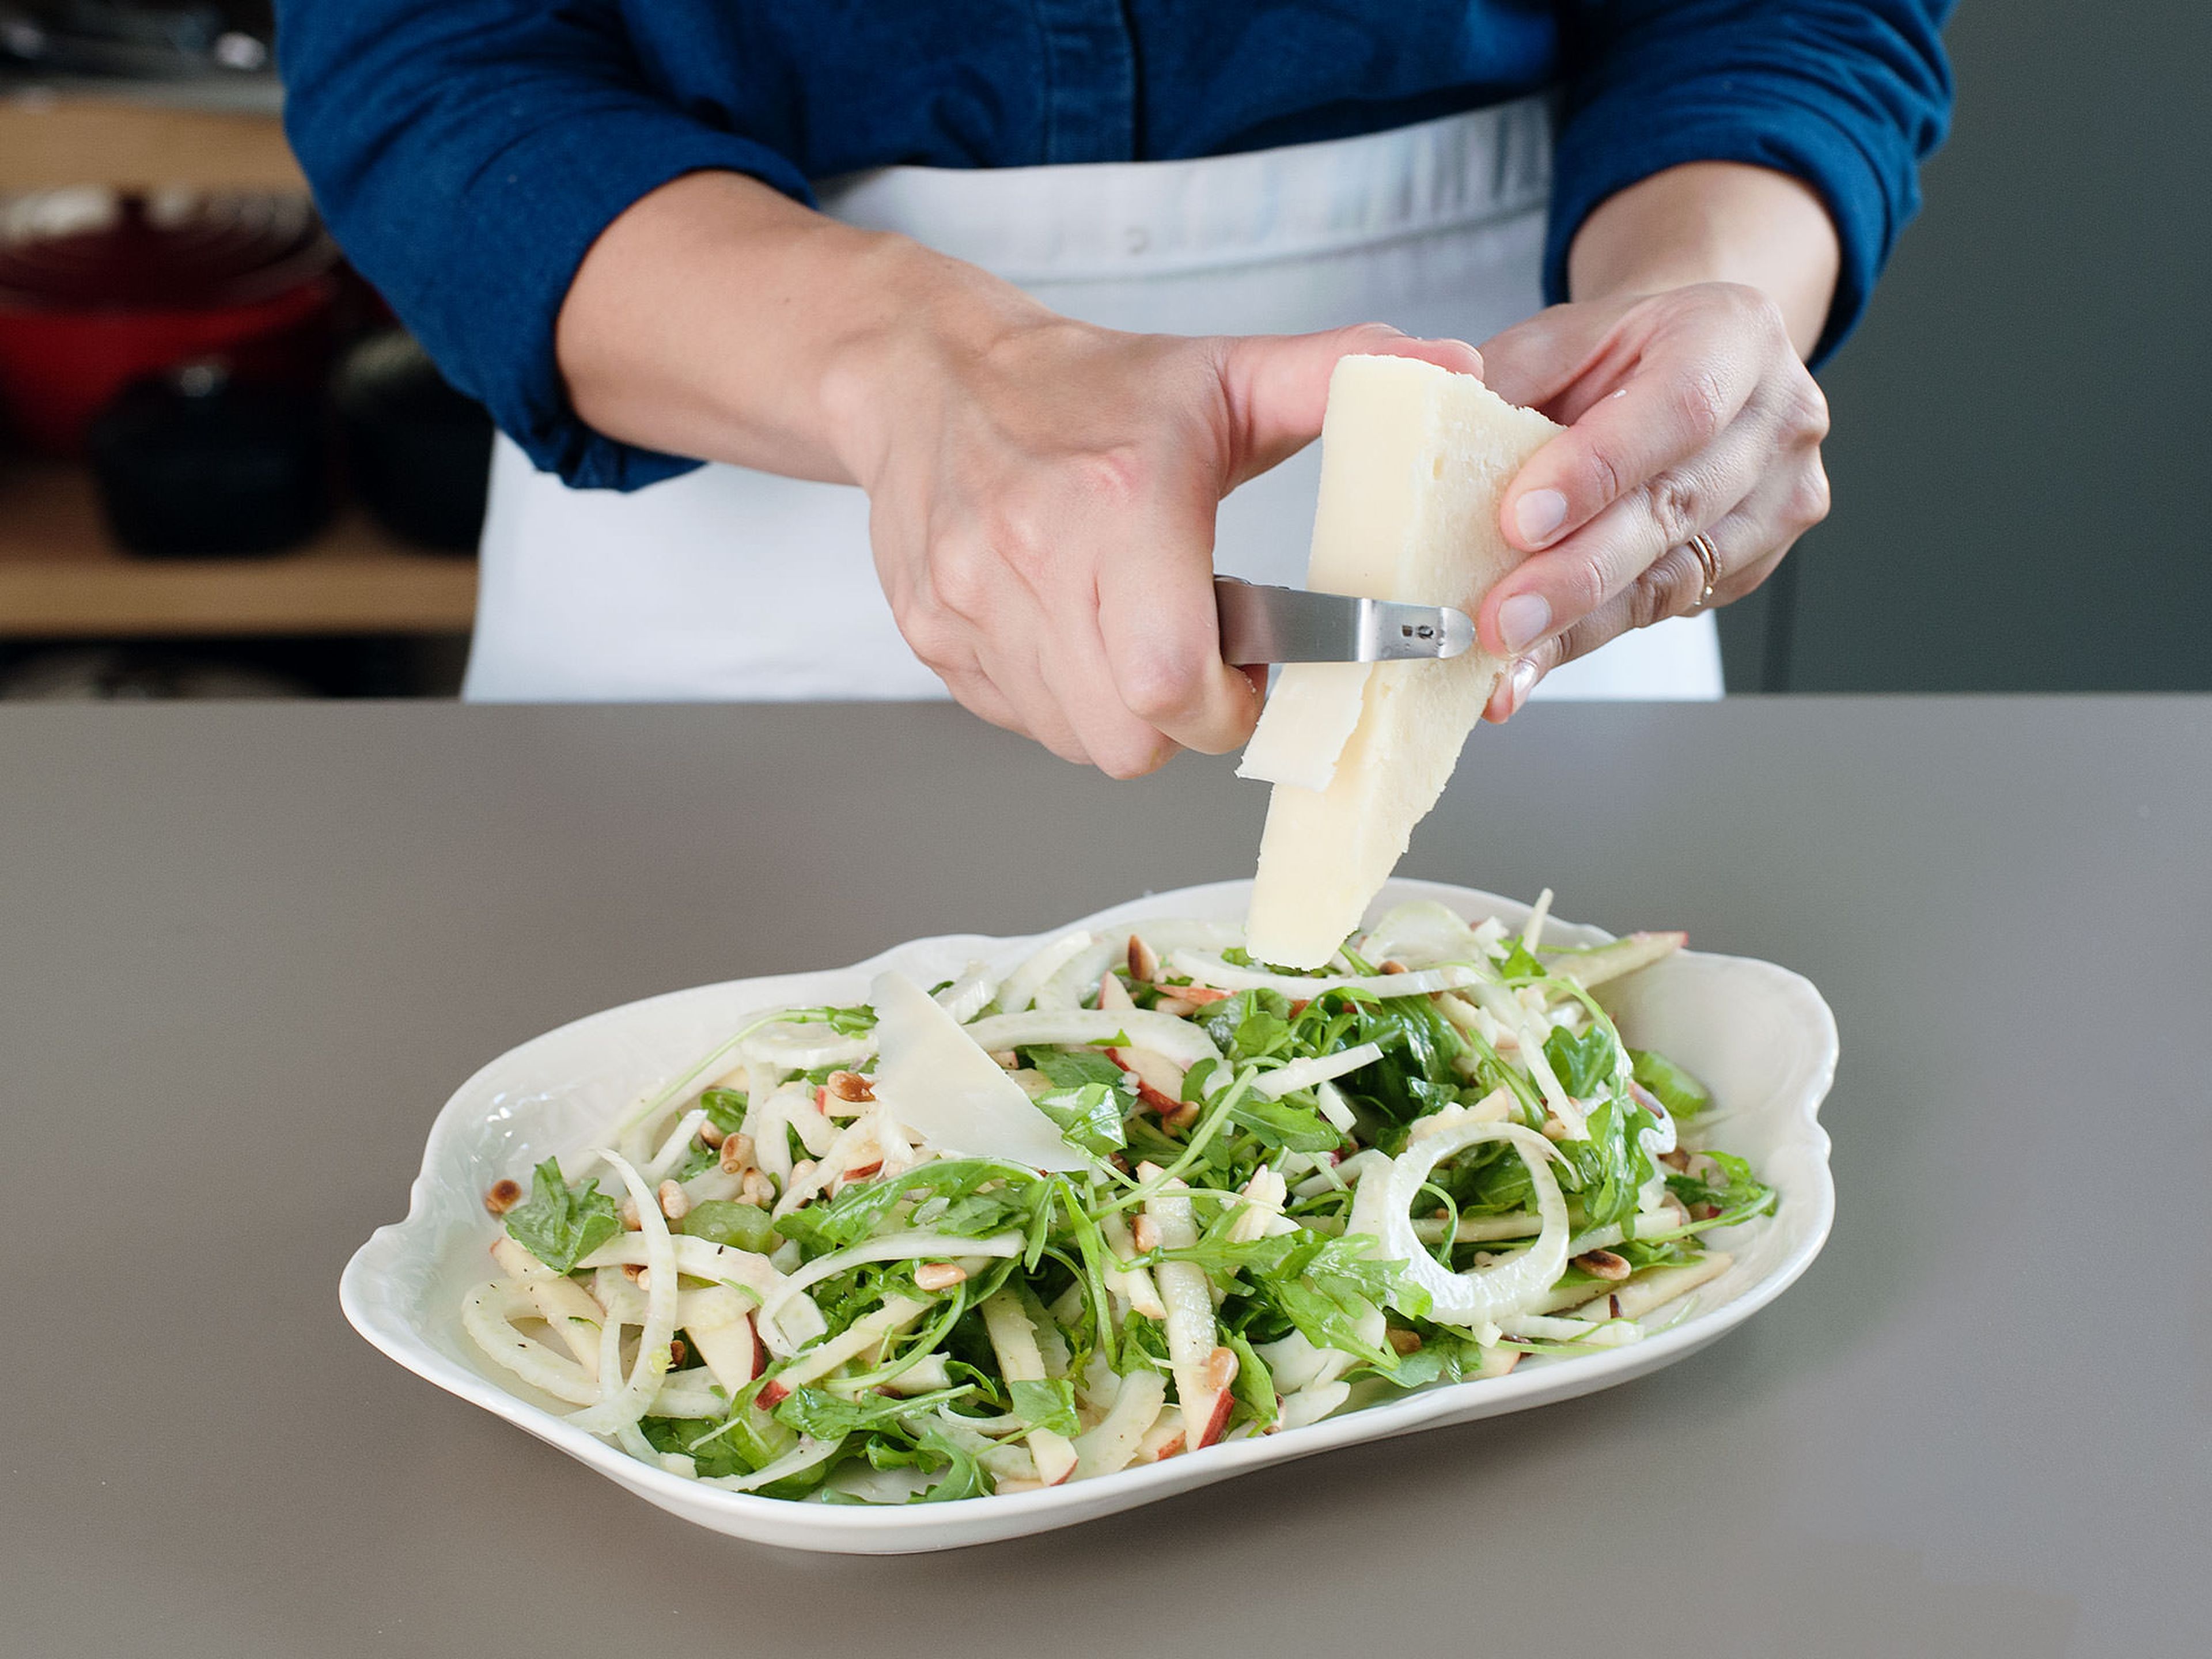 Transfer salad to a serving platter and garnish with shavings of pecorino, pine nuts, and chopped tarragon. Enjoy!